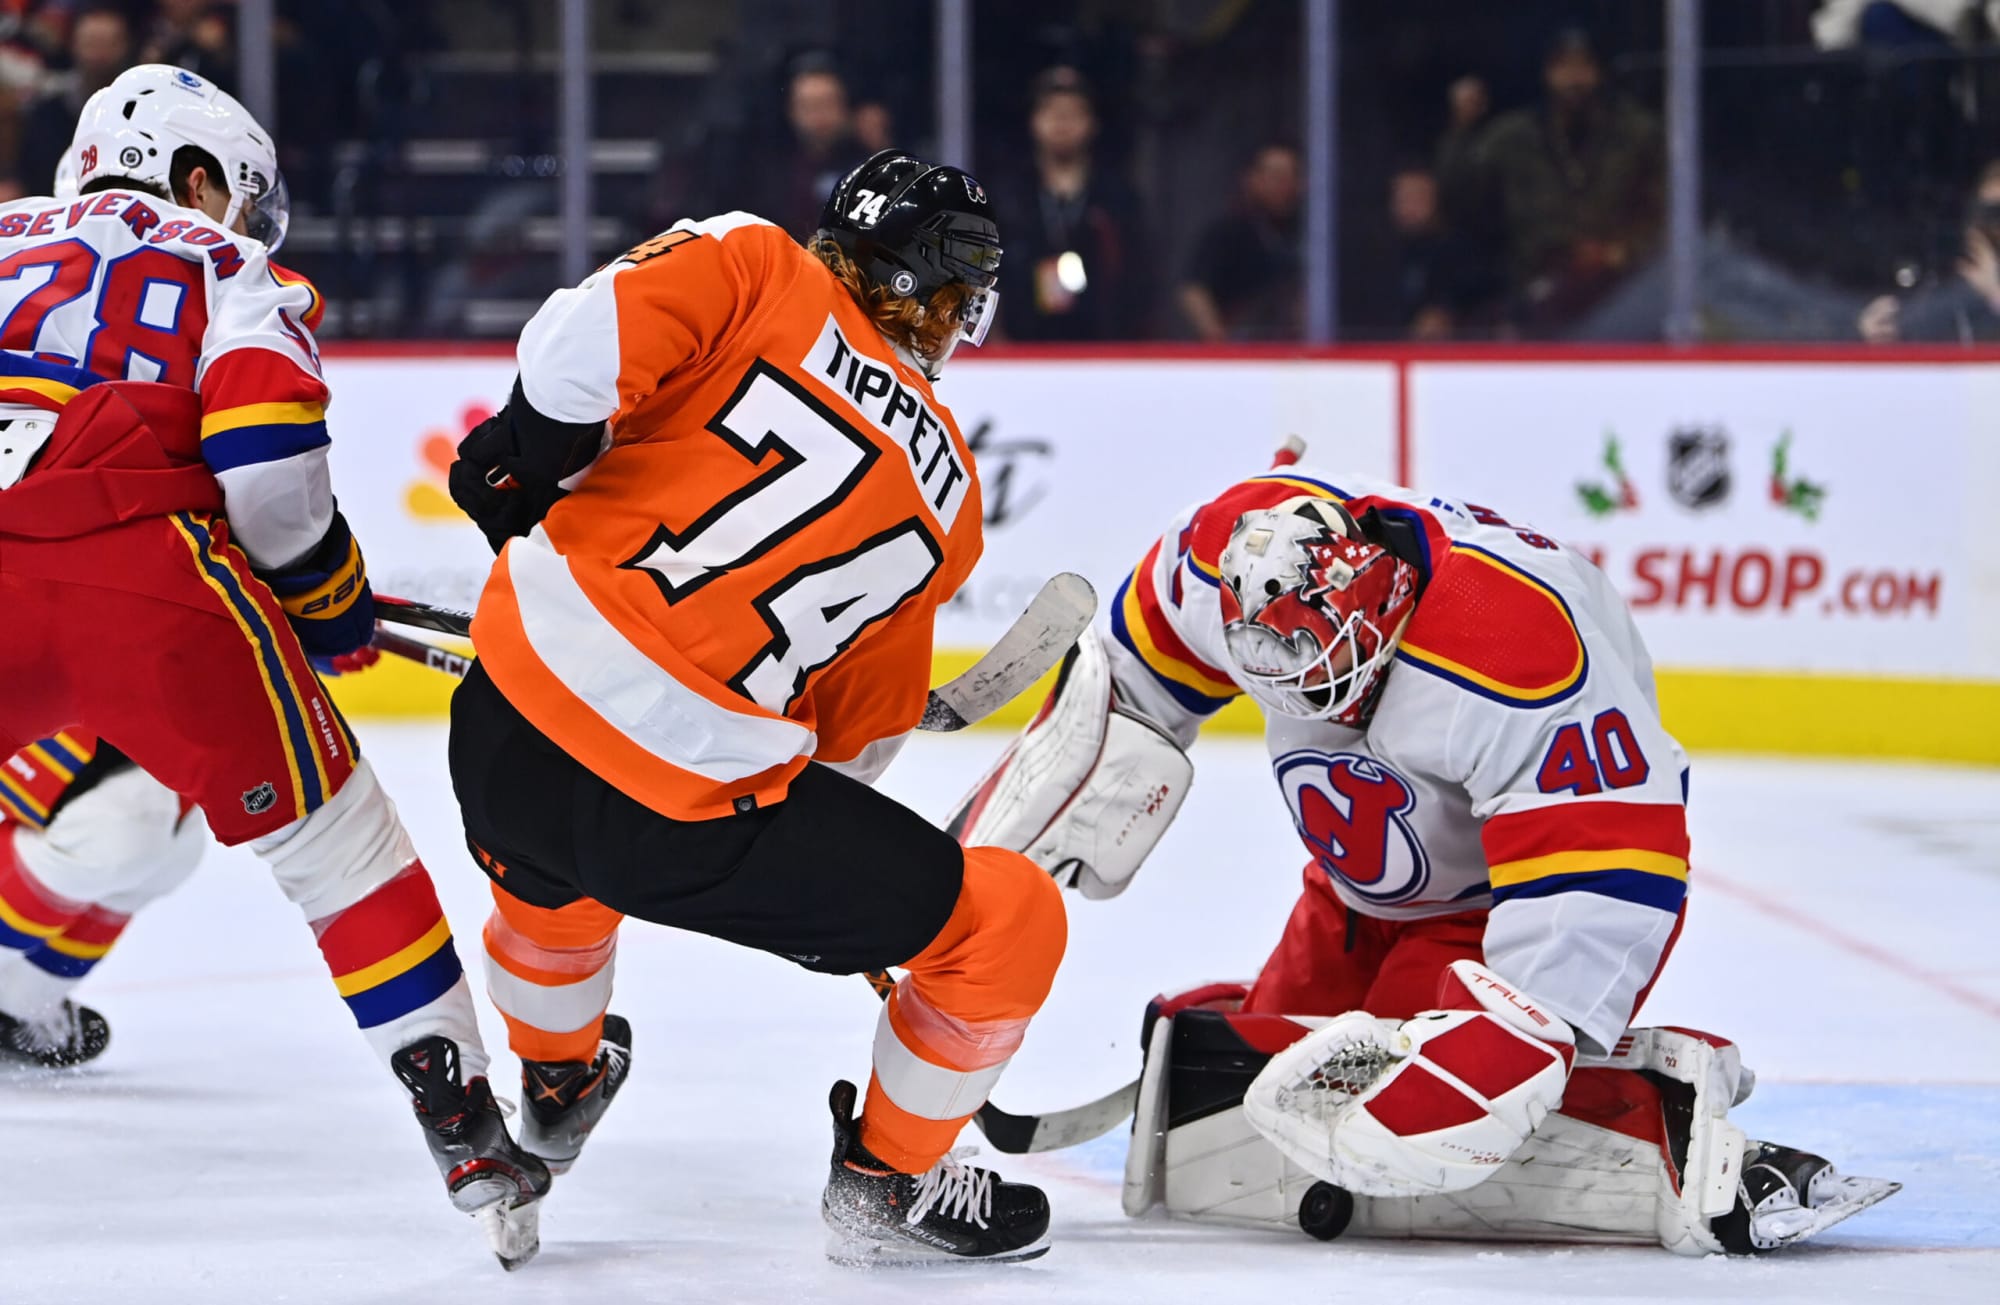 Flyers' Owen Tippett excited for new opportunity with Philly